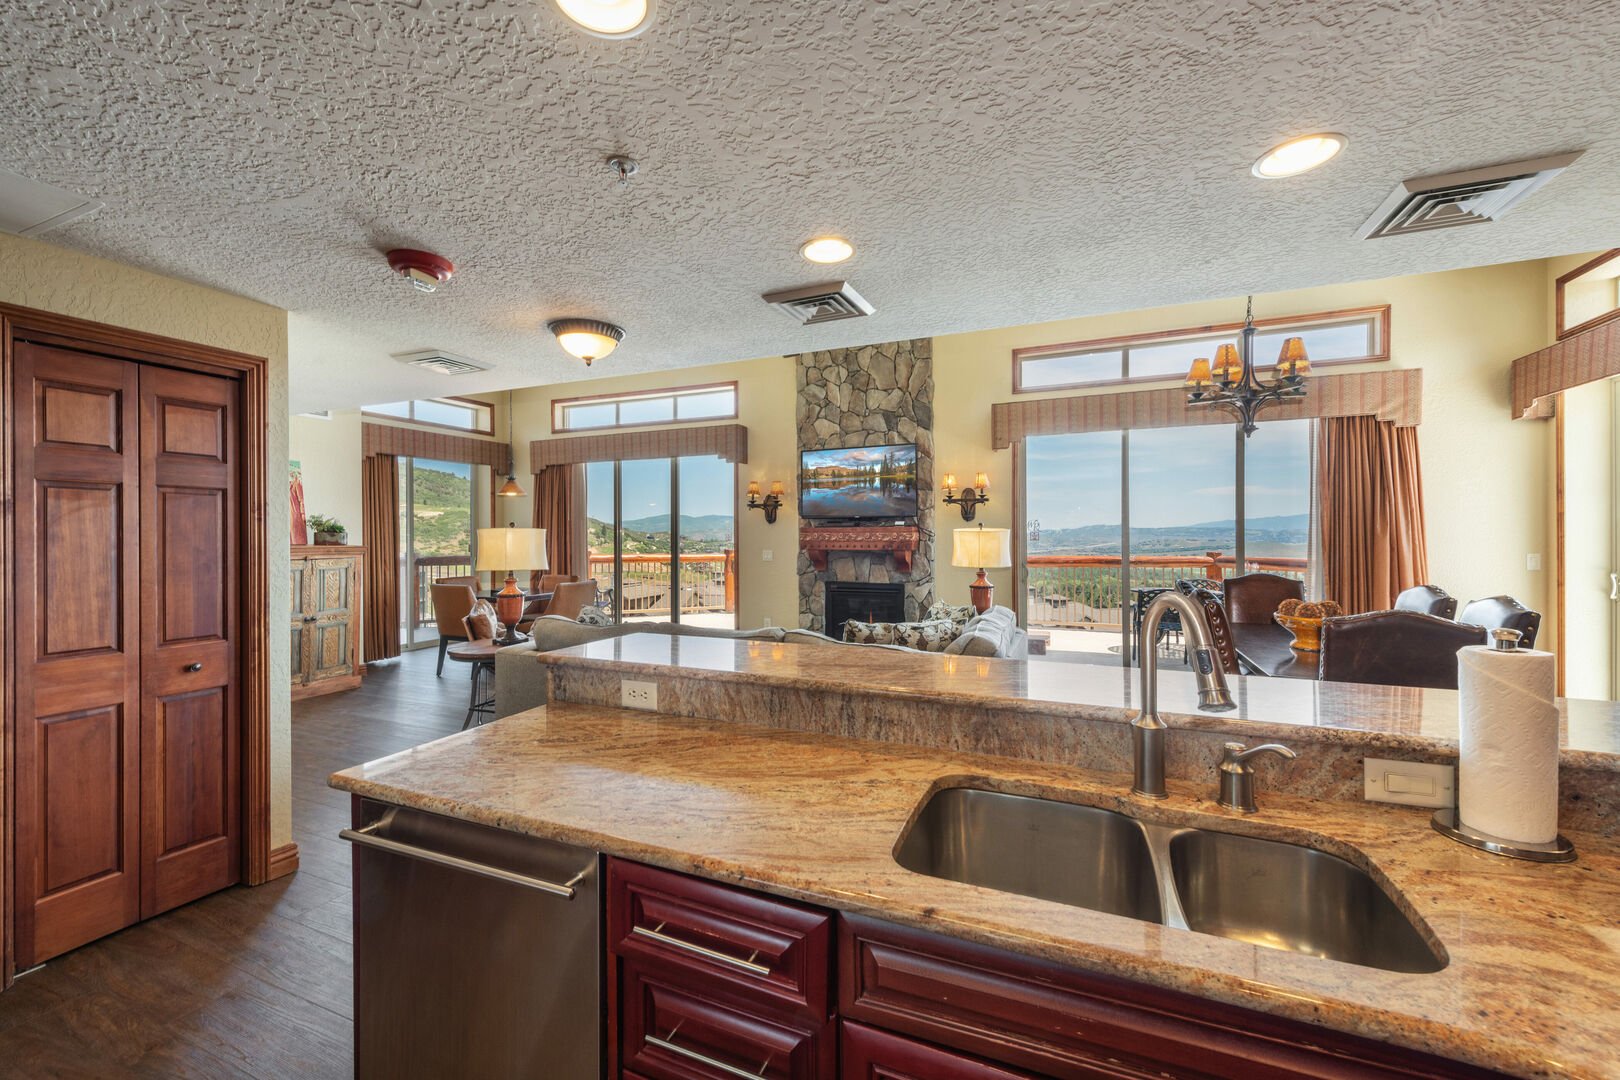 Breathtaking views from the kitchen.